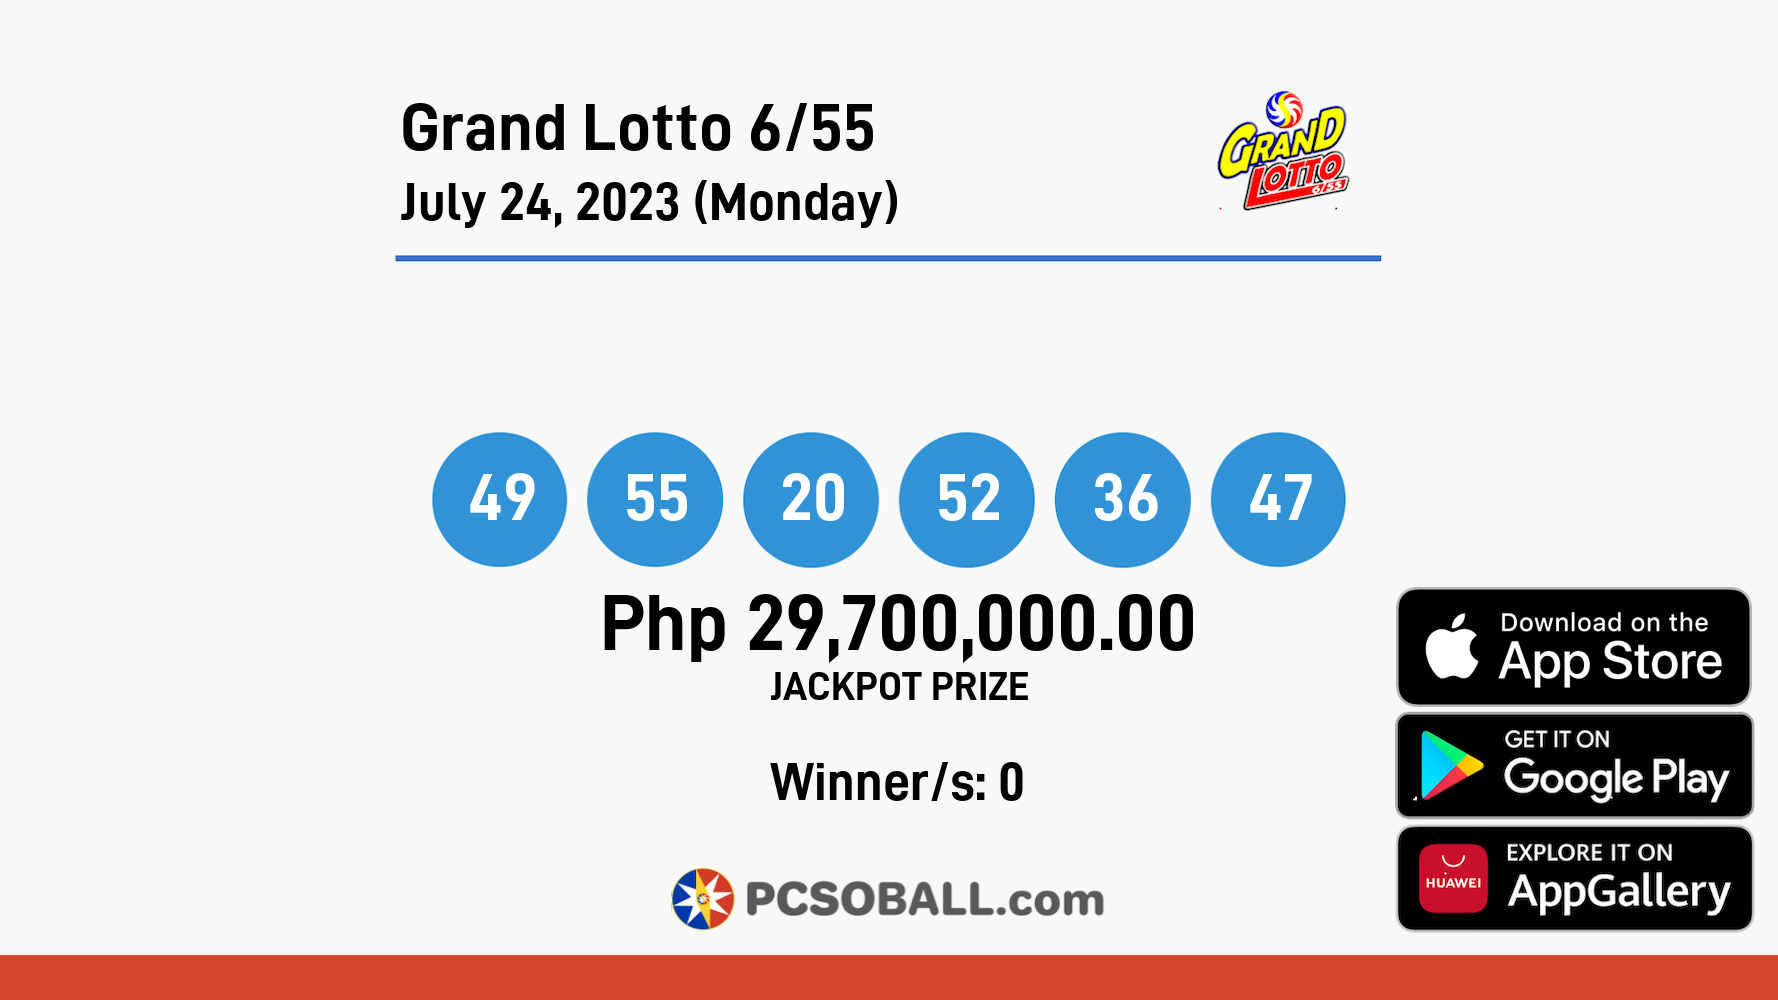 Grand Lotto 6/55 July 24, 2023 (Monday) Result